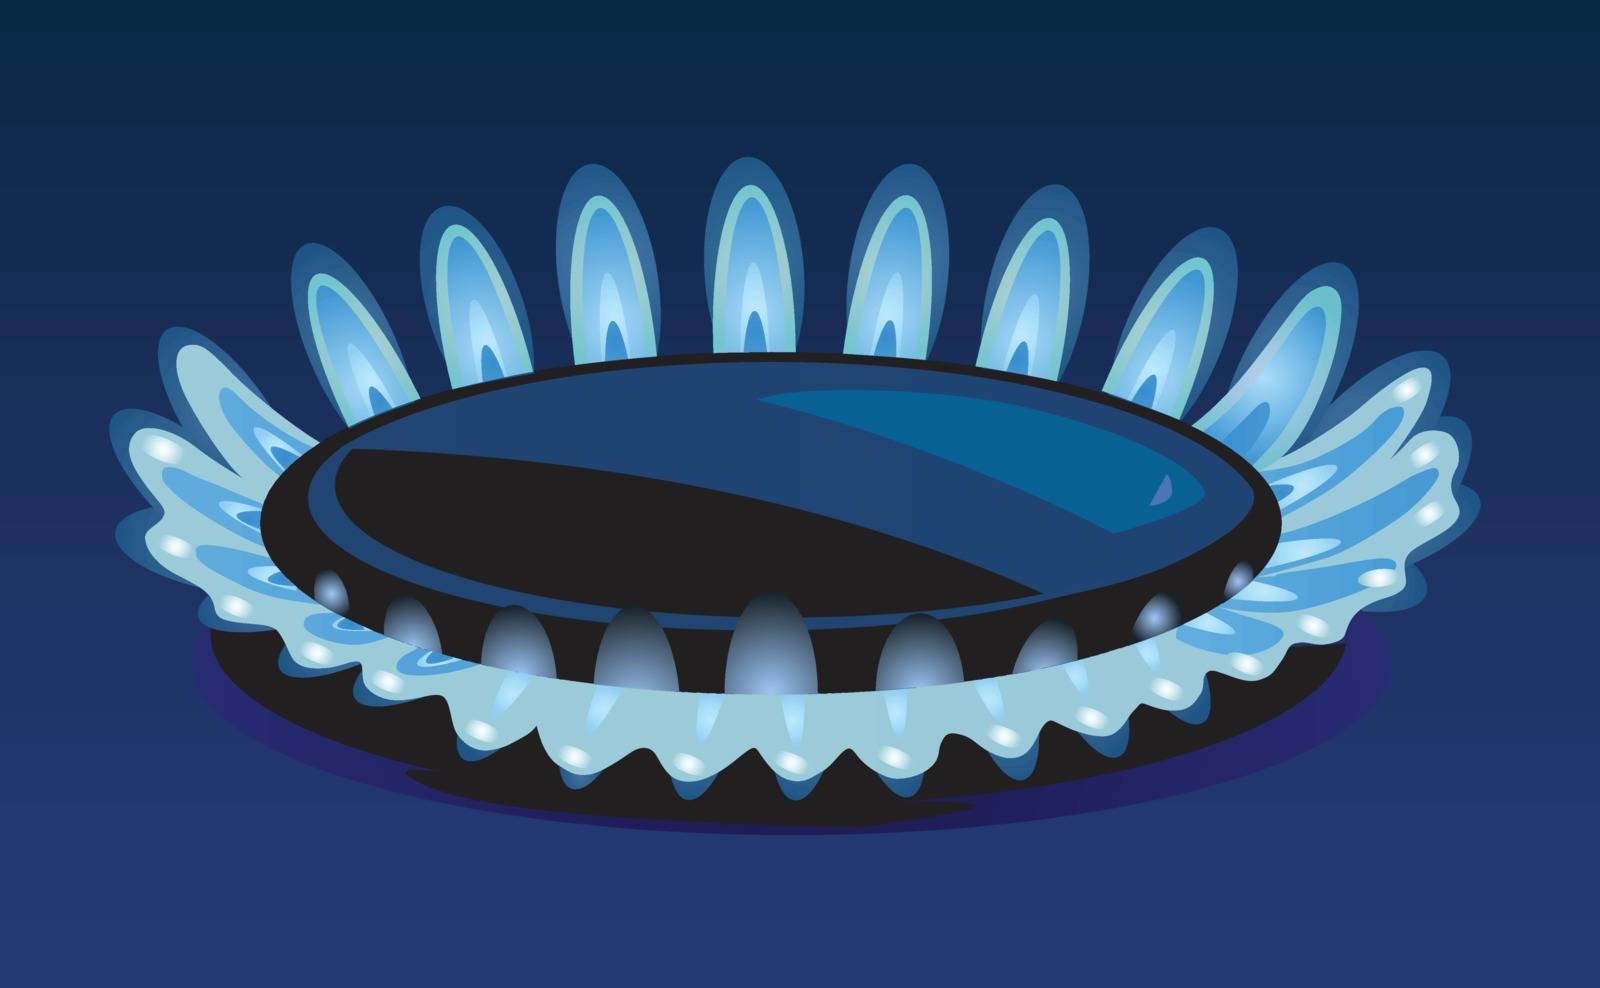 Flames of gas stove in the dark Vector eps 10